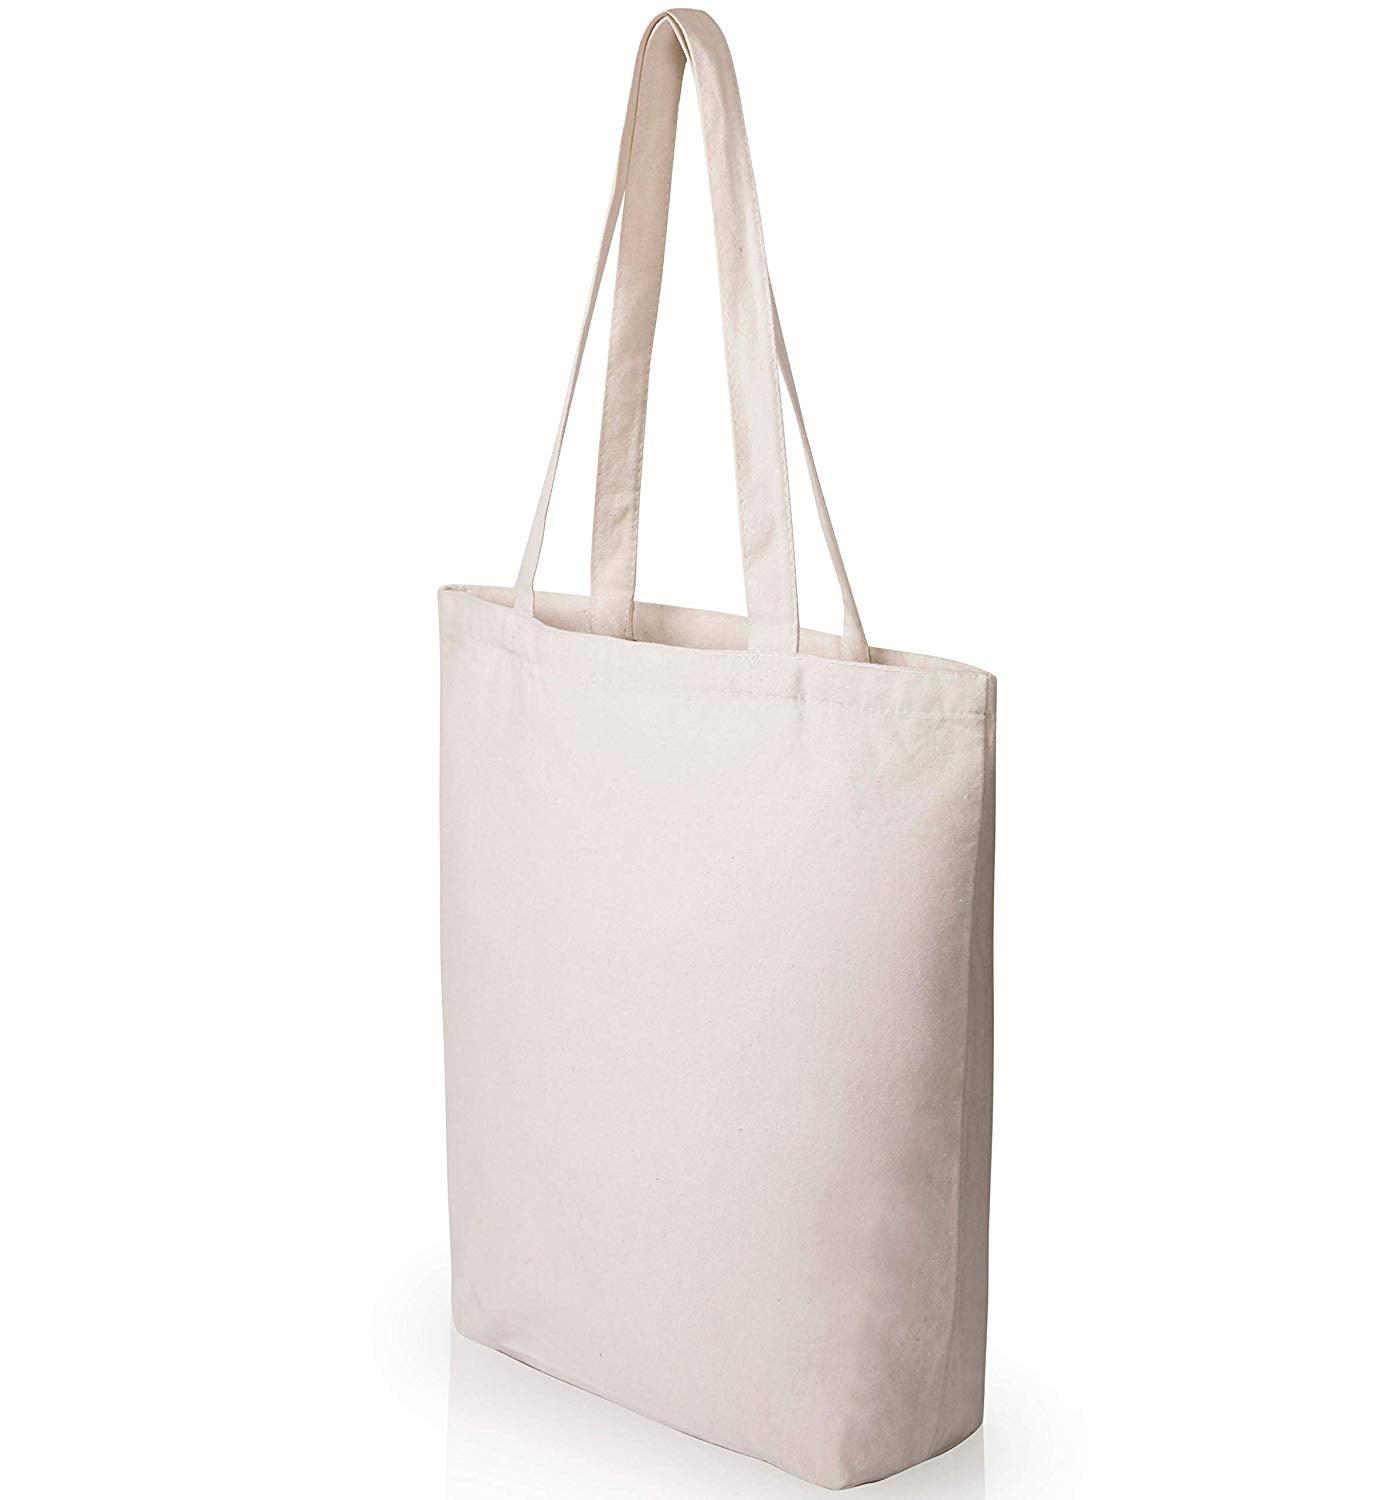 100% cotton tote bag with gusset